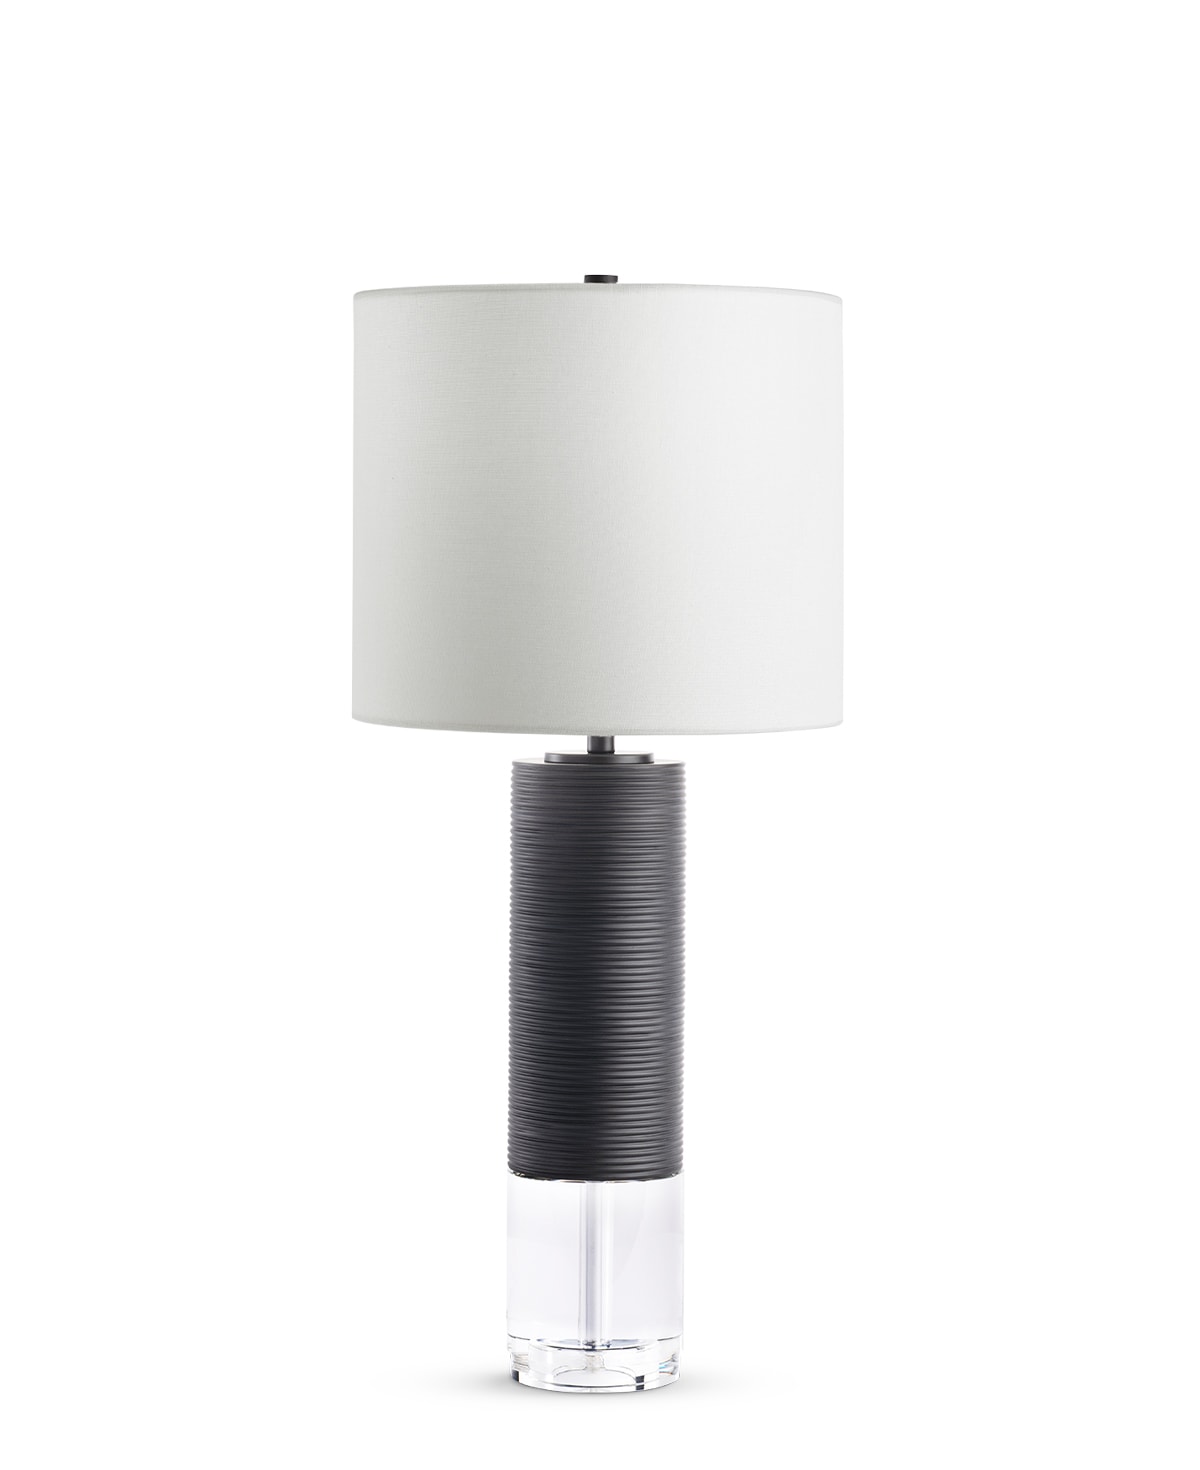 FlowDecor Baby Locke Table Lamp in resin with black matte finish and finely ribbed surface and crystal and white linen drum shade (# 4586)